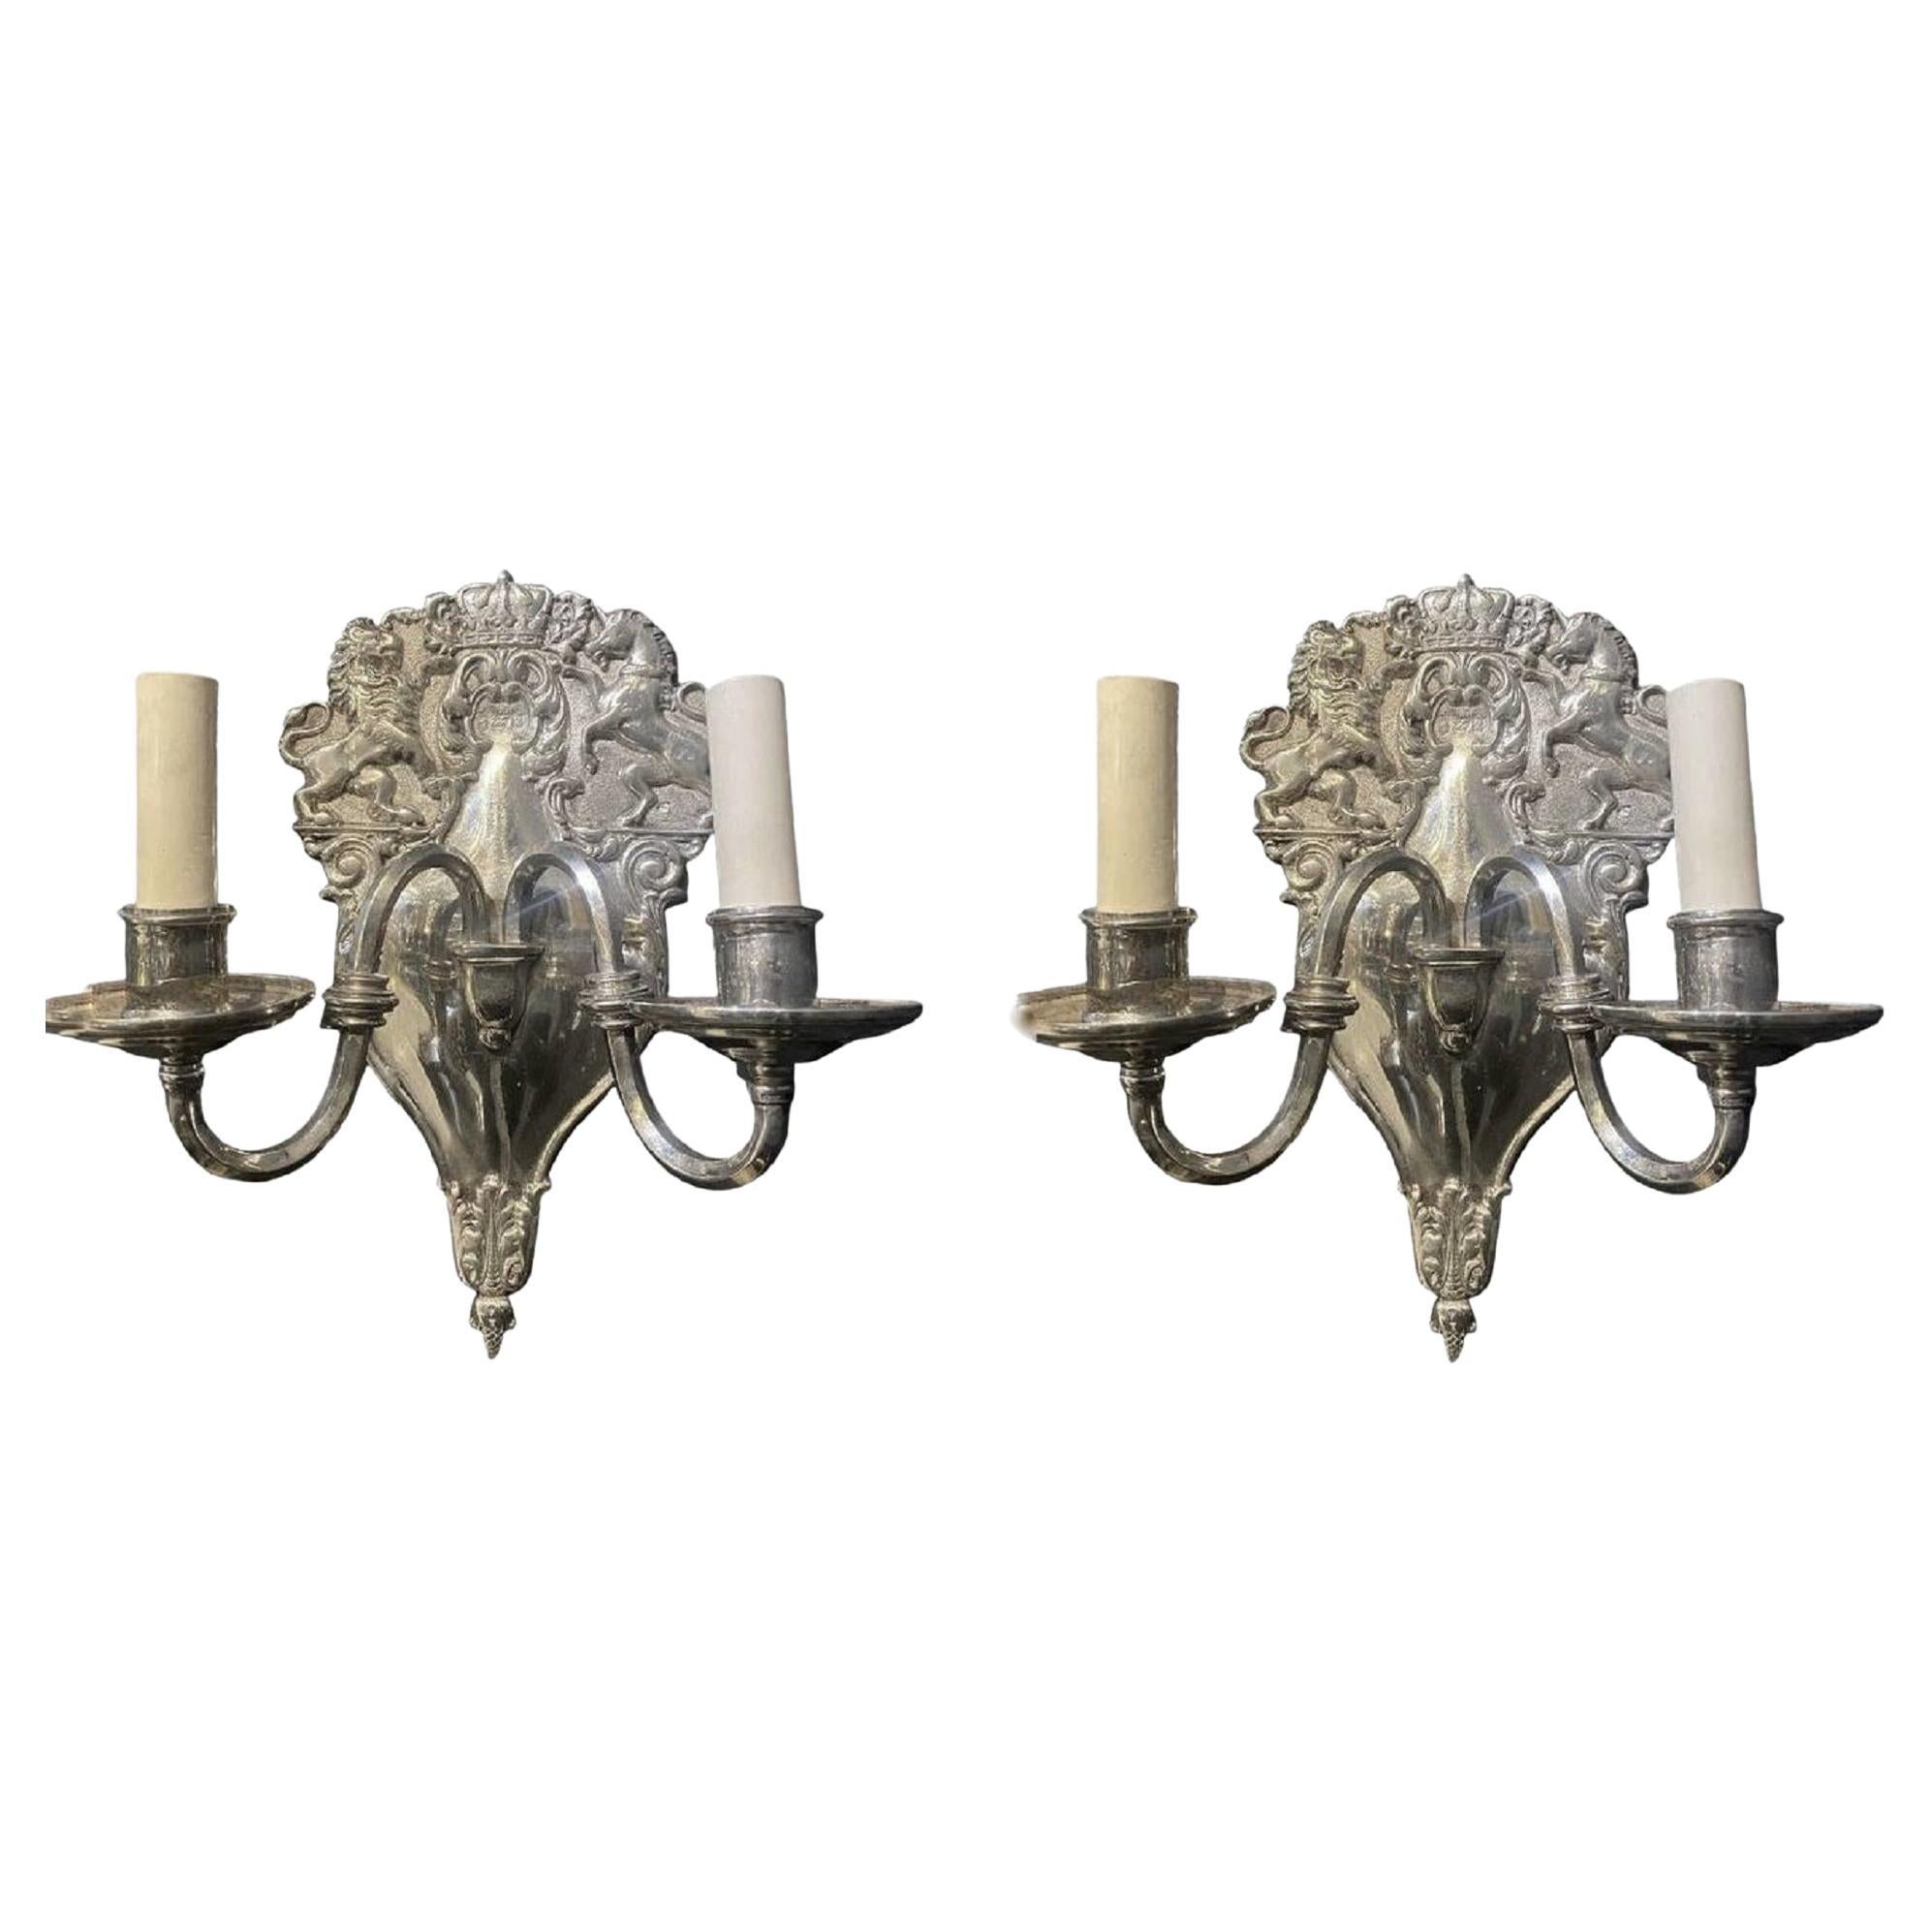 1920's English Silver Plated Sconces with Heraldry Design For Sale